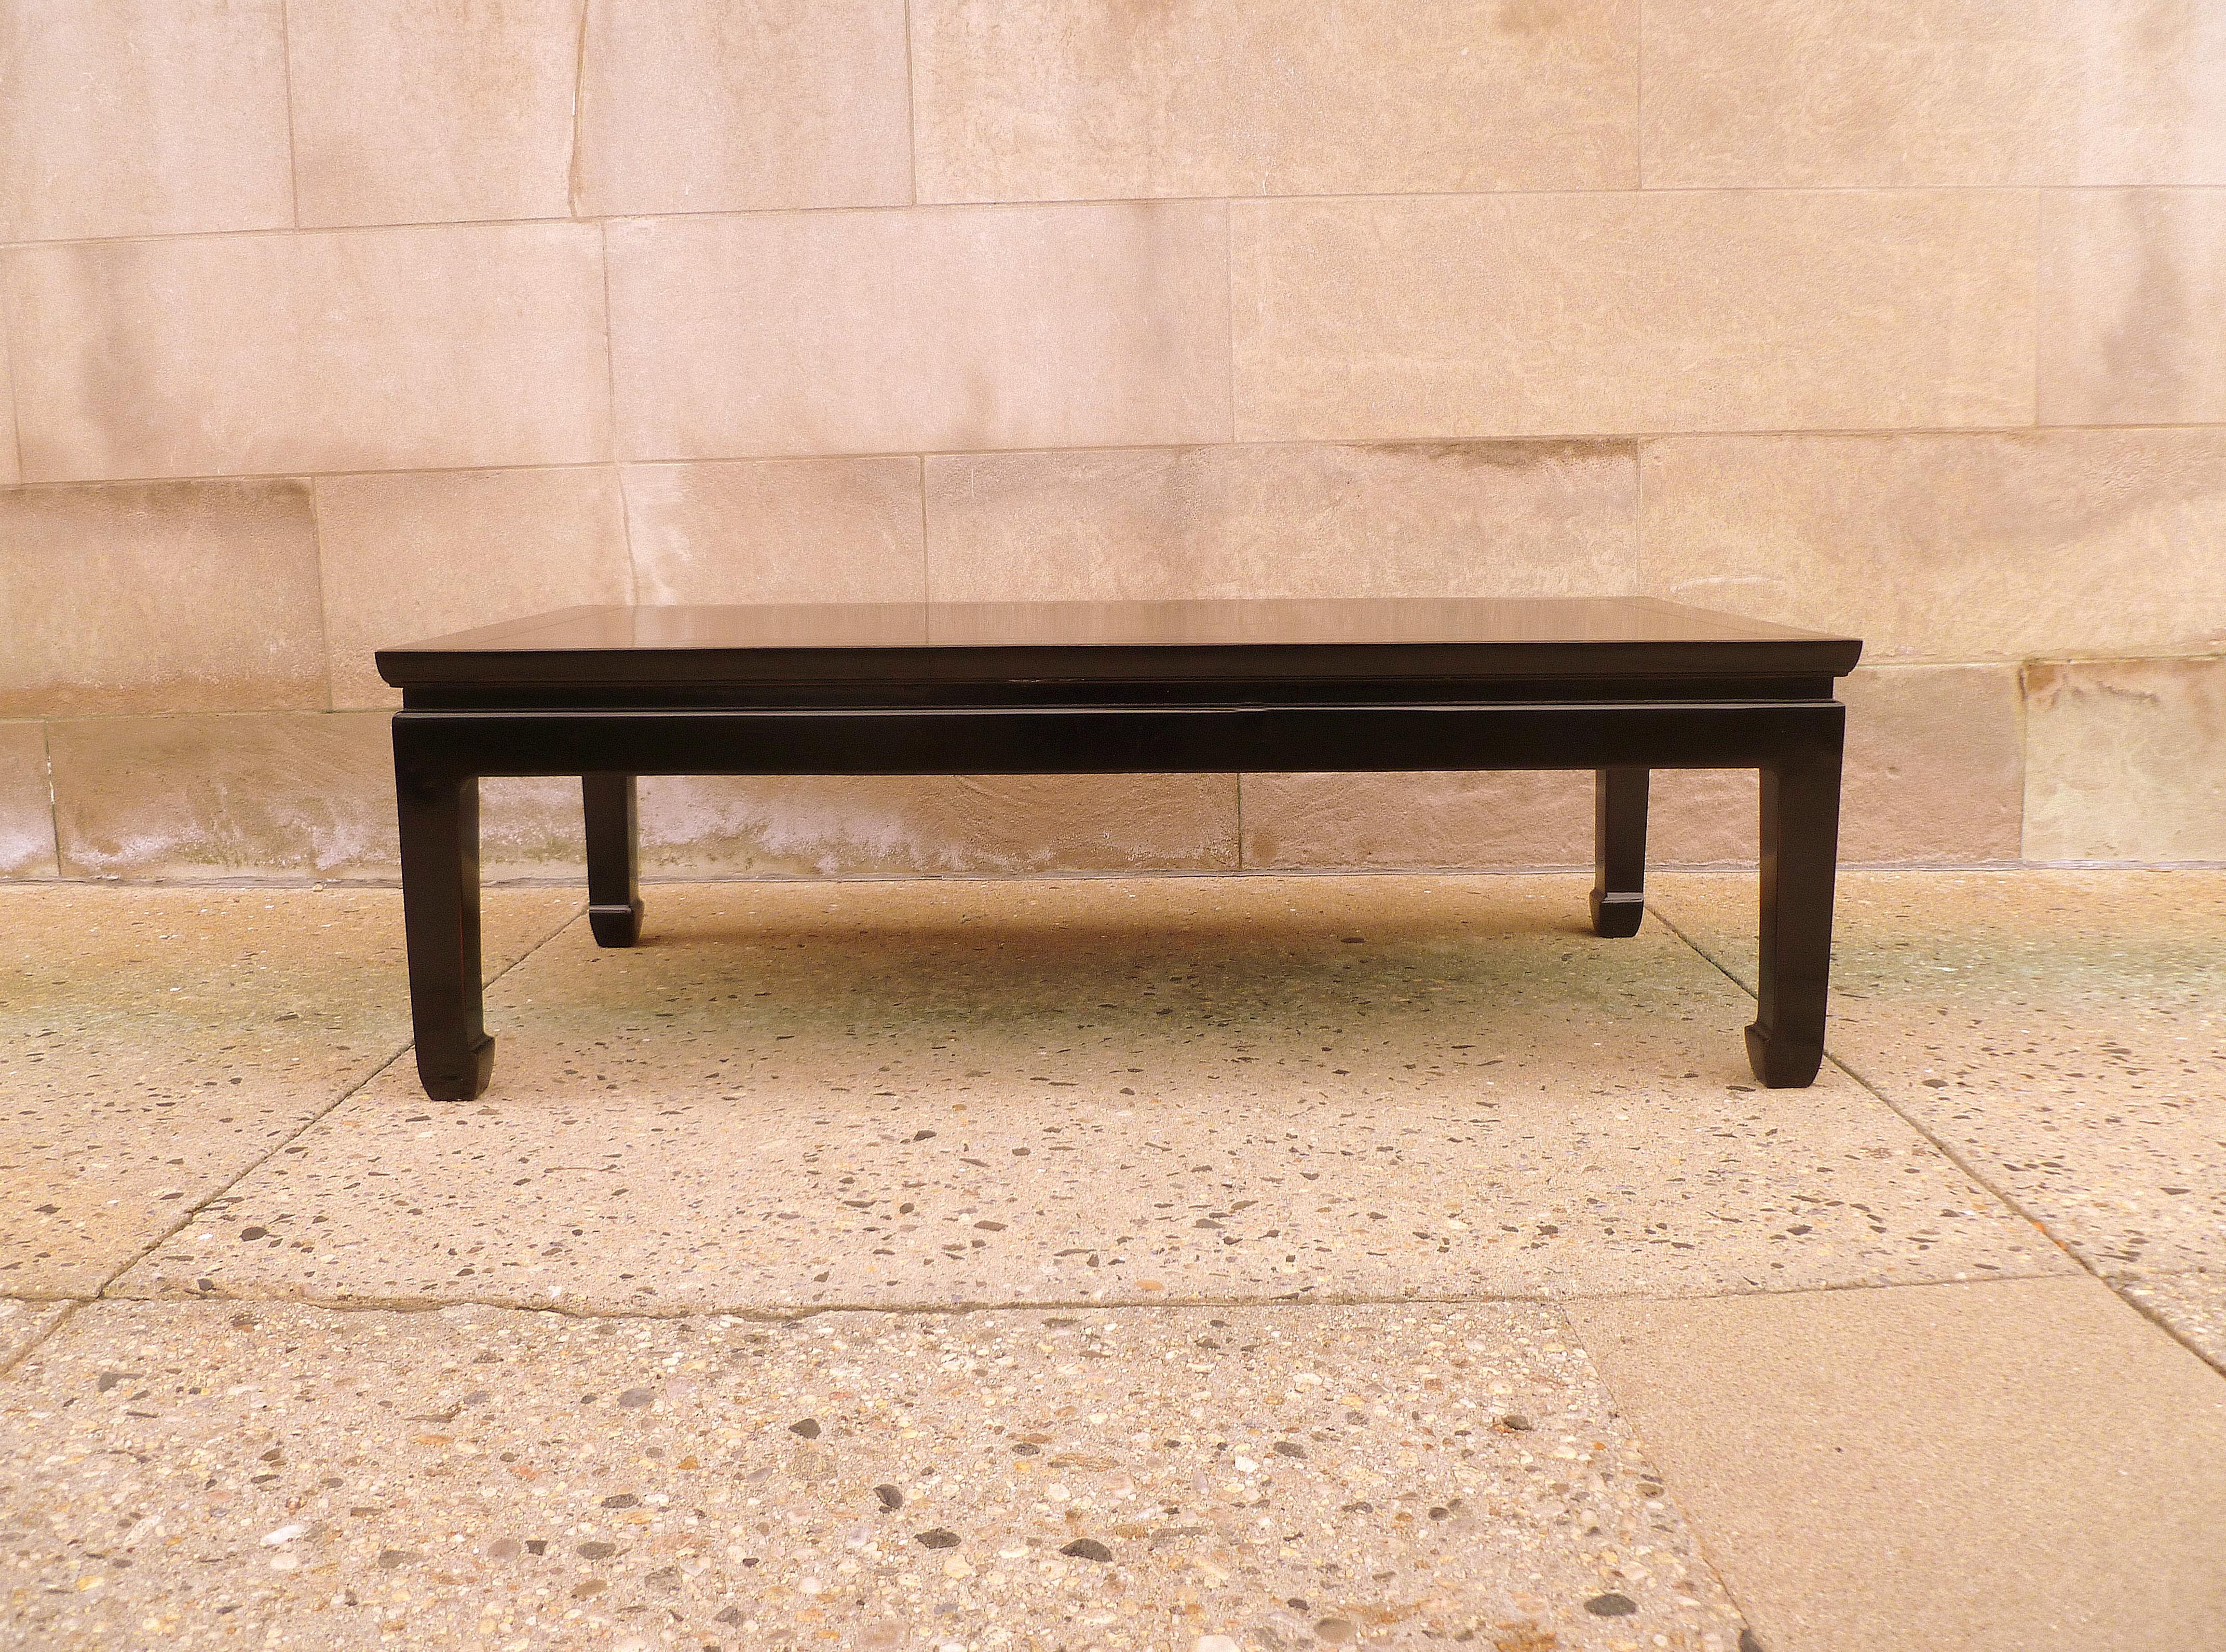 simple and elegant black lacquer low table, beautiful form and color.
We carry fine quality furniture with elegant finished and has been appeared many times in 